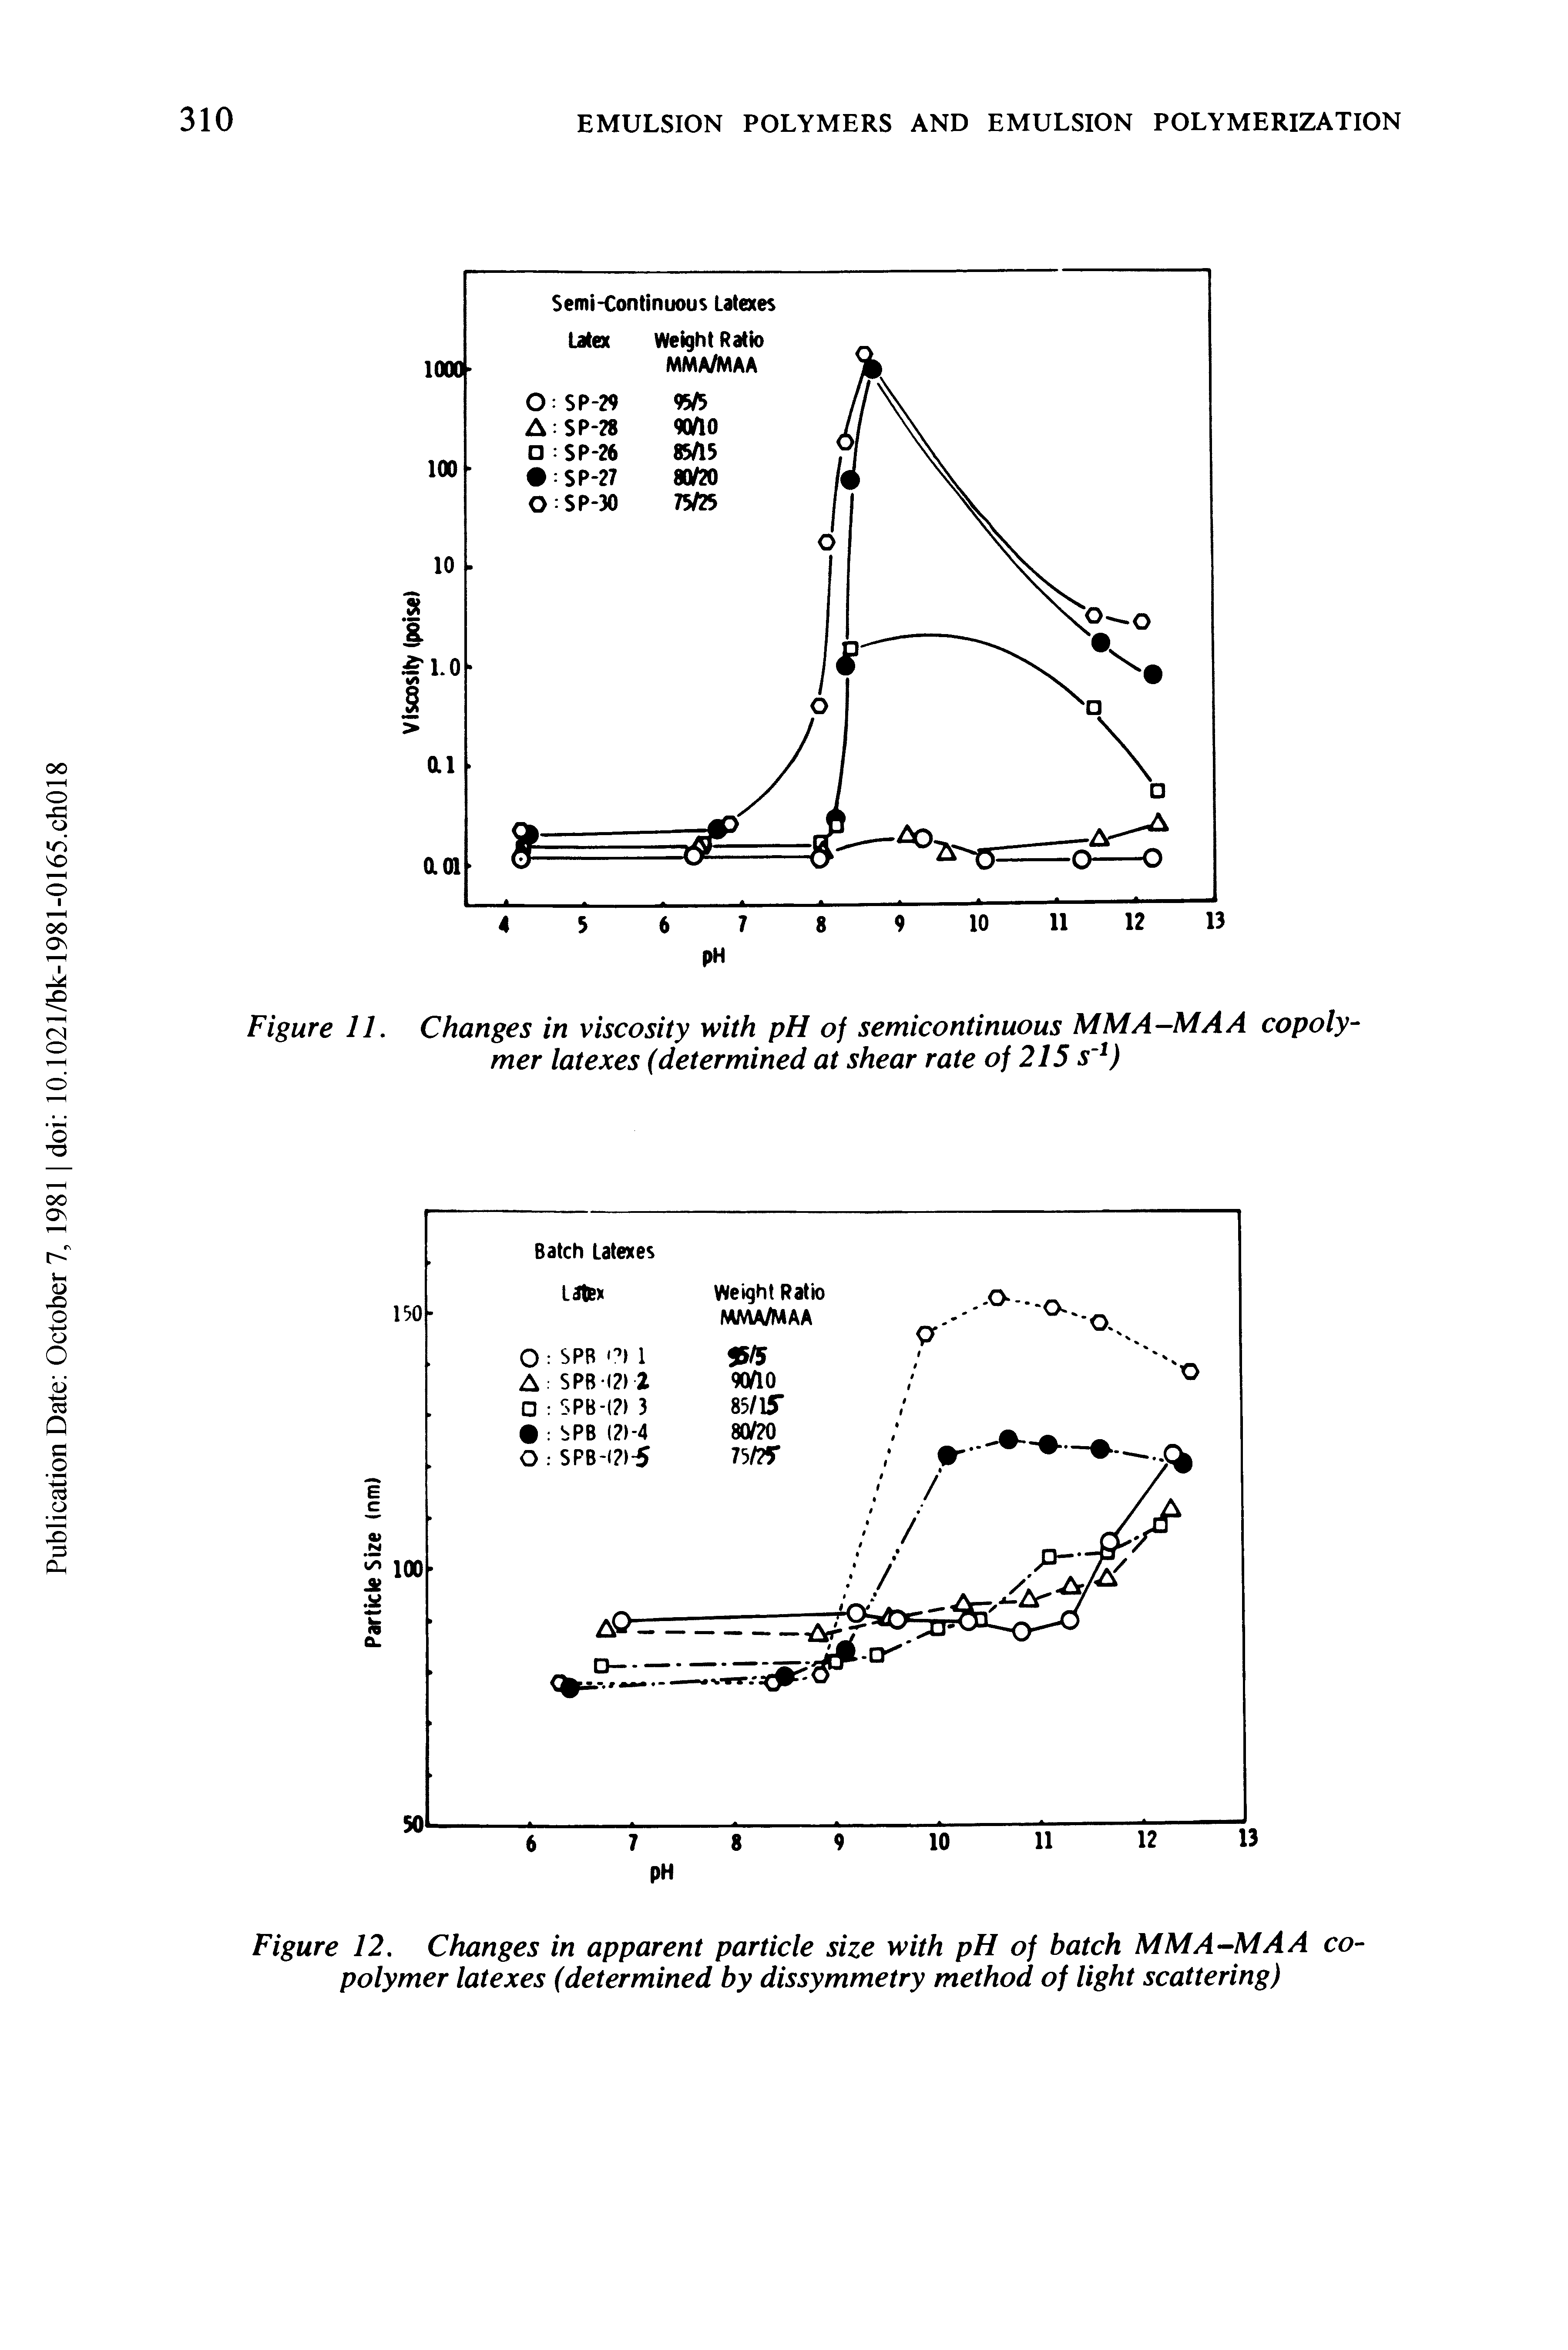 Figure 12. Changes in apparent particle size with pH of batch MMA-MAA copolymer latexes (determined by dissymmetry method of light scattering)...